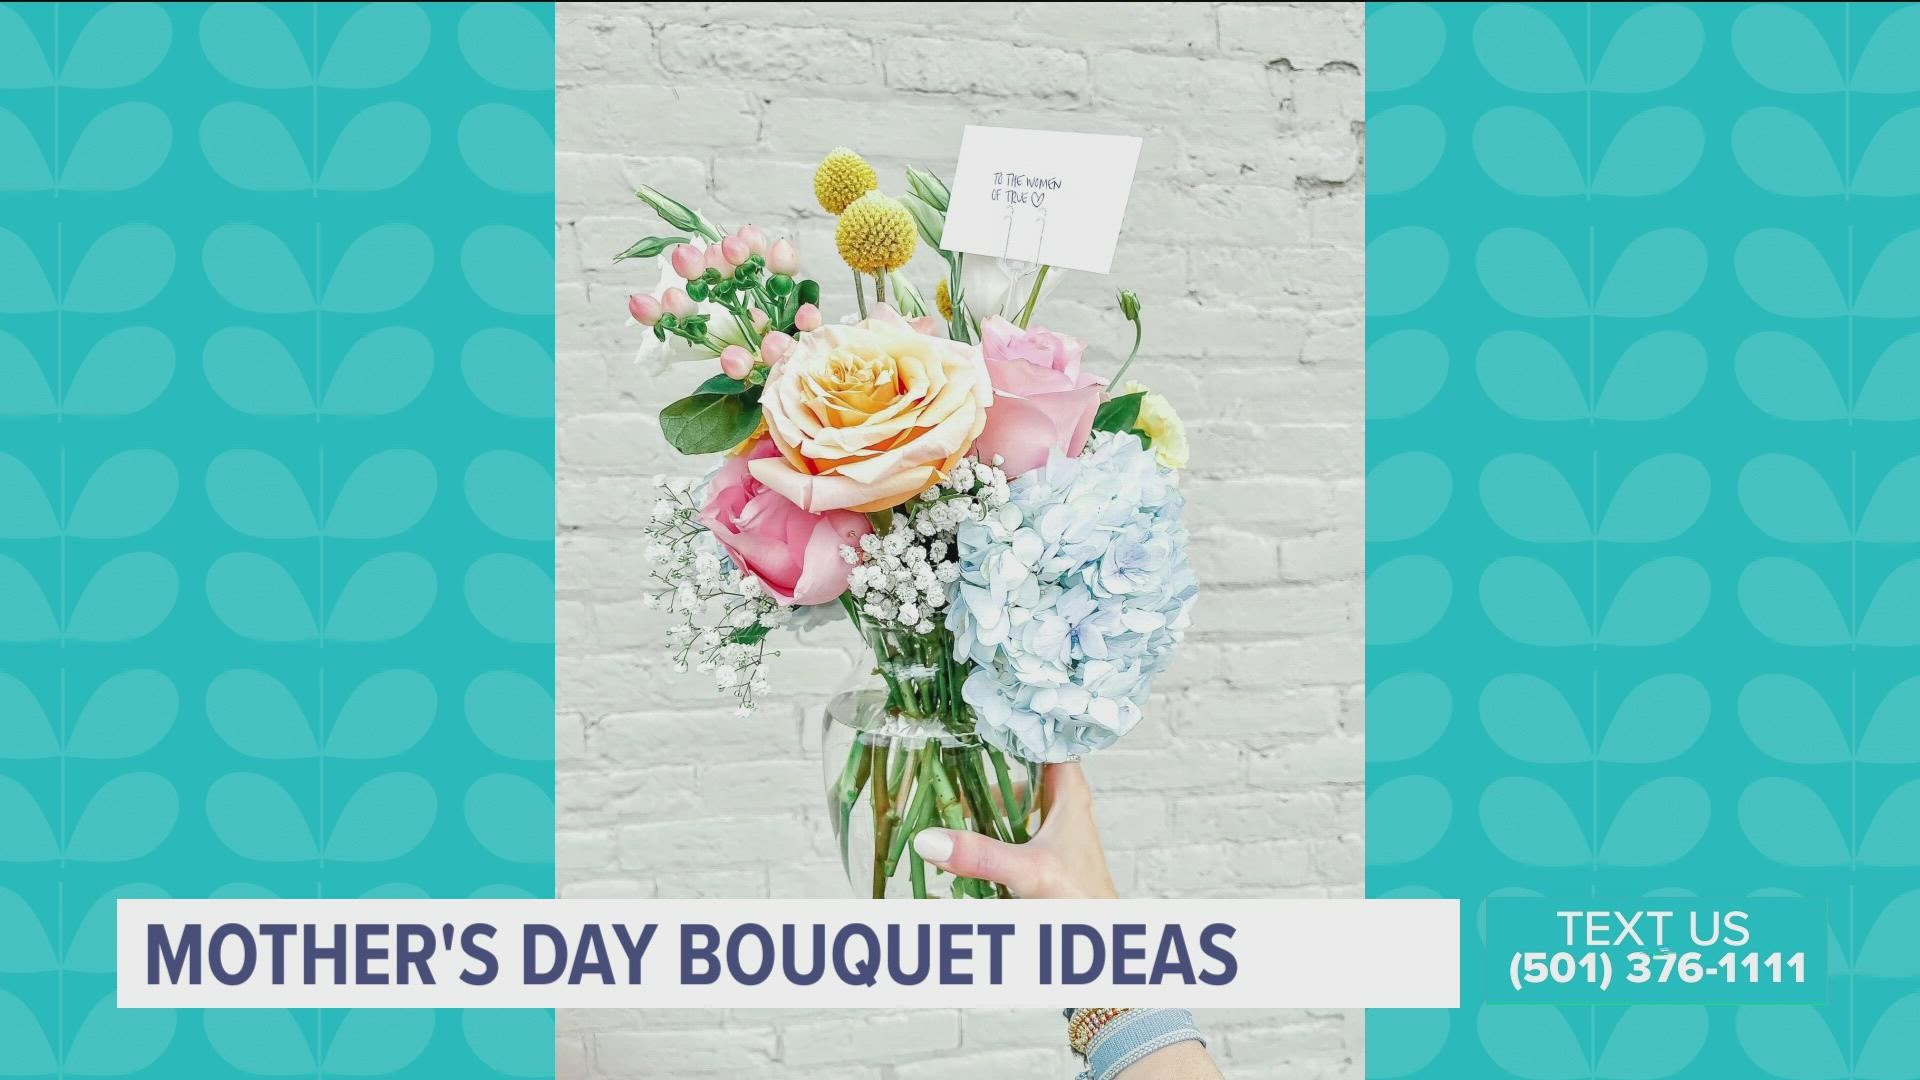 Mother's Day is quickly approaching and you might need some inspiration on what to get. Sarah Prickett a florist in Benton is here with some ideas.